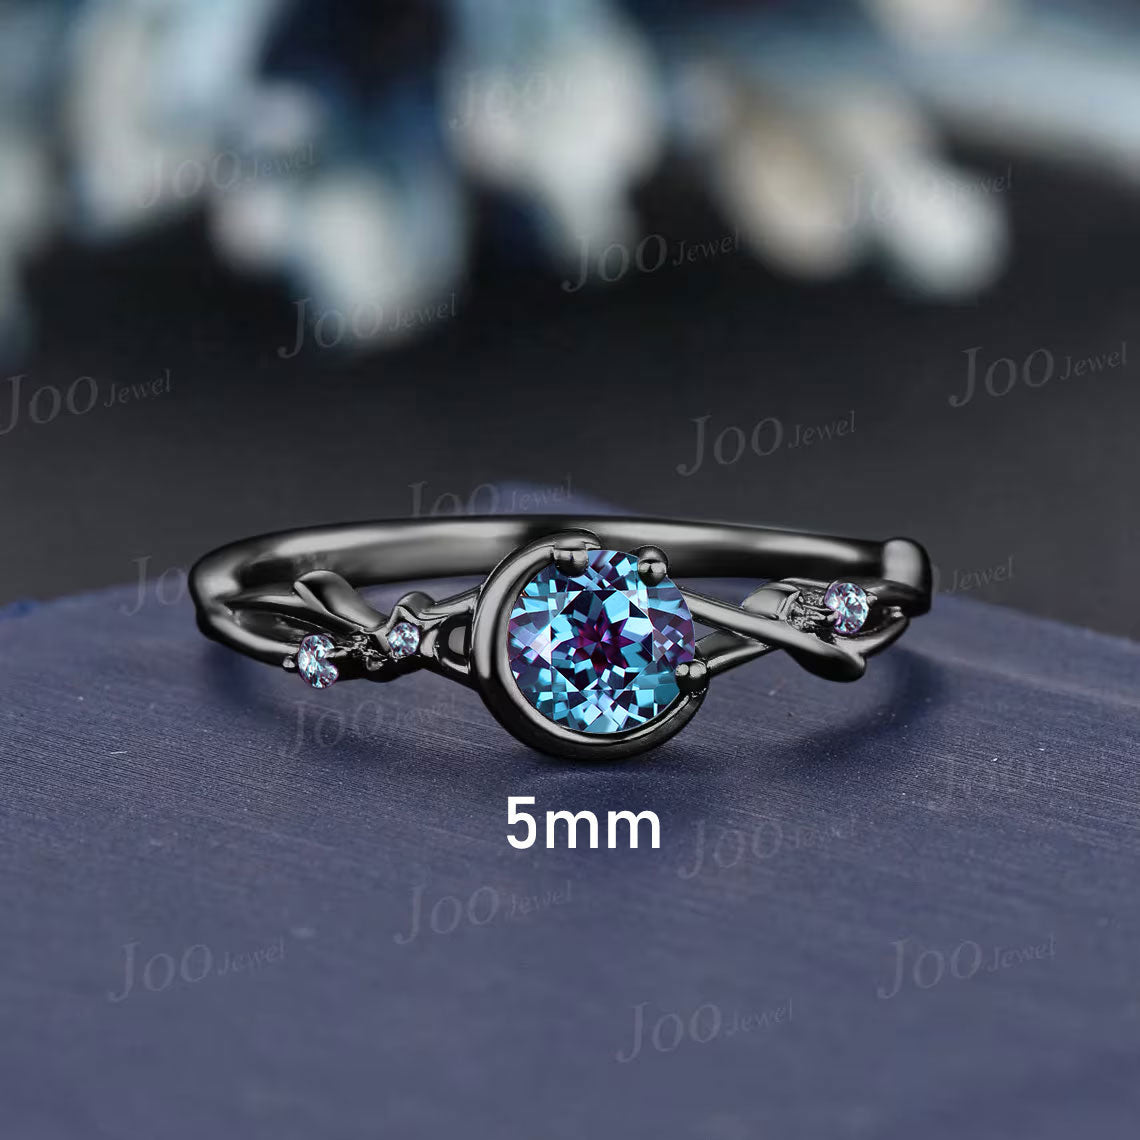 6.5mm/5mm Round Cut Nature Inspired Color-Change Alexandrite Ring Moon Star Design Cluster Alexandrite Twig Vine Blue Ring Celestial Promise Ring